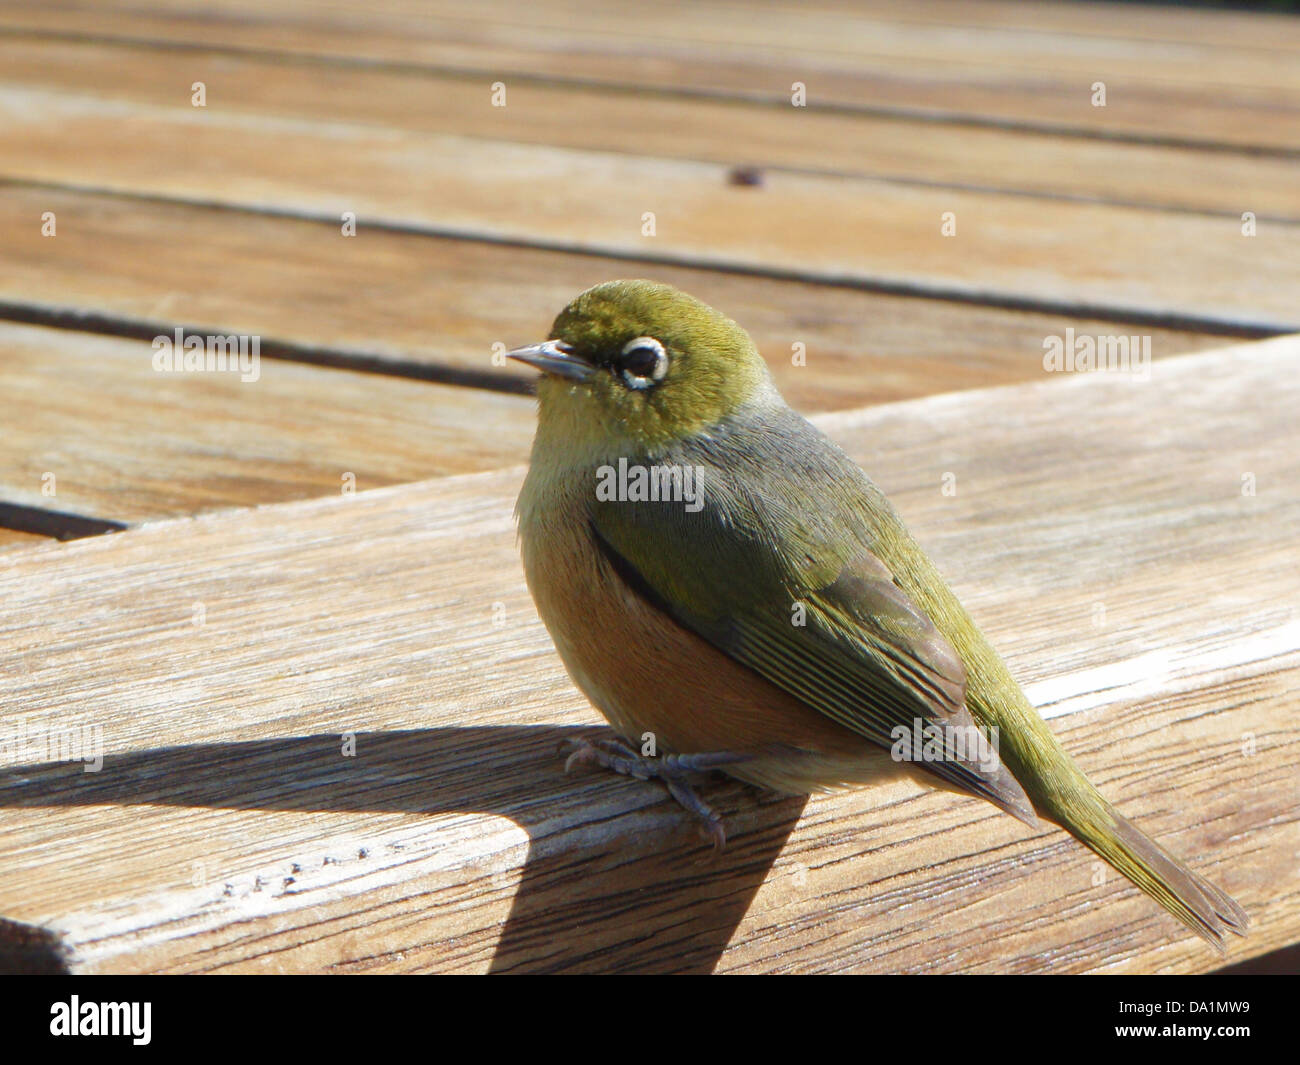 A little green bird knowns as a wax-eye or silvereye perched on a wooden park table/bench. Stock Photo